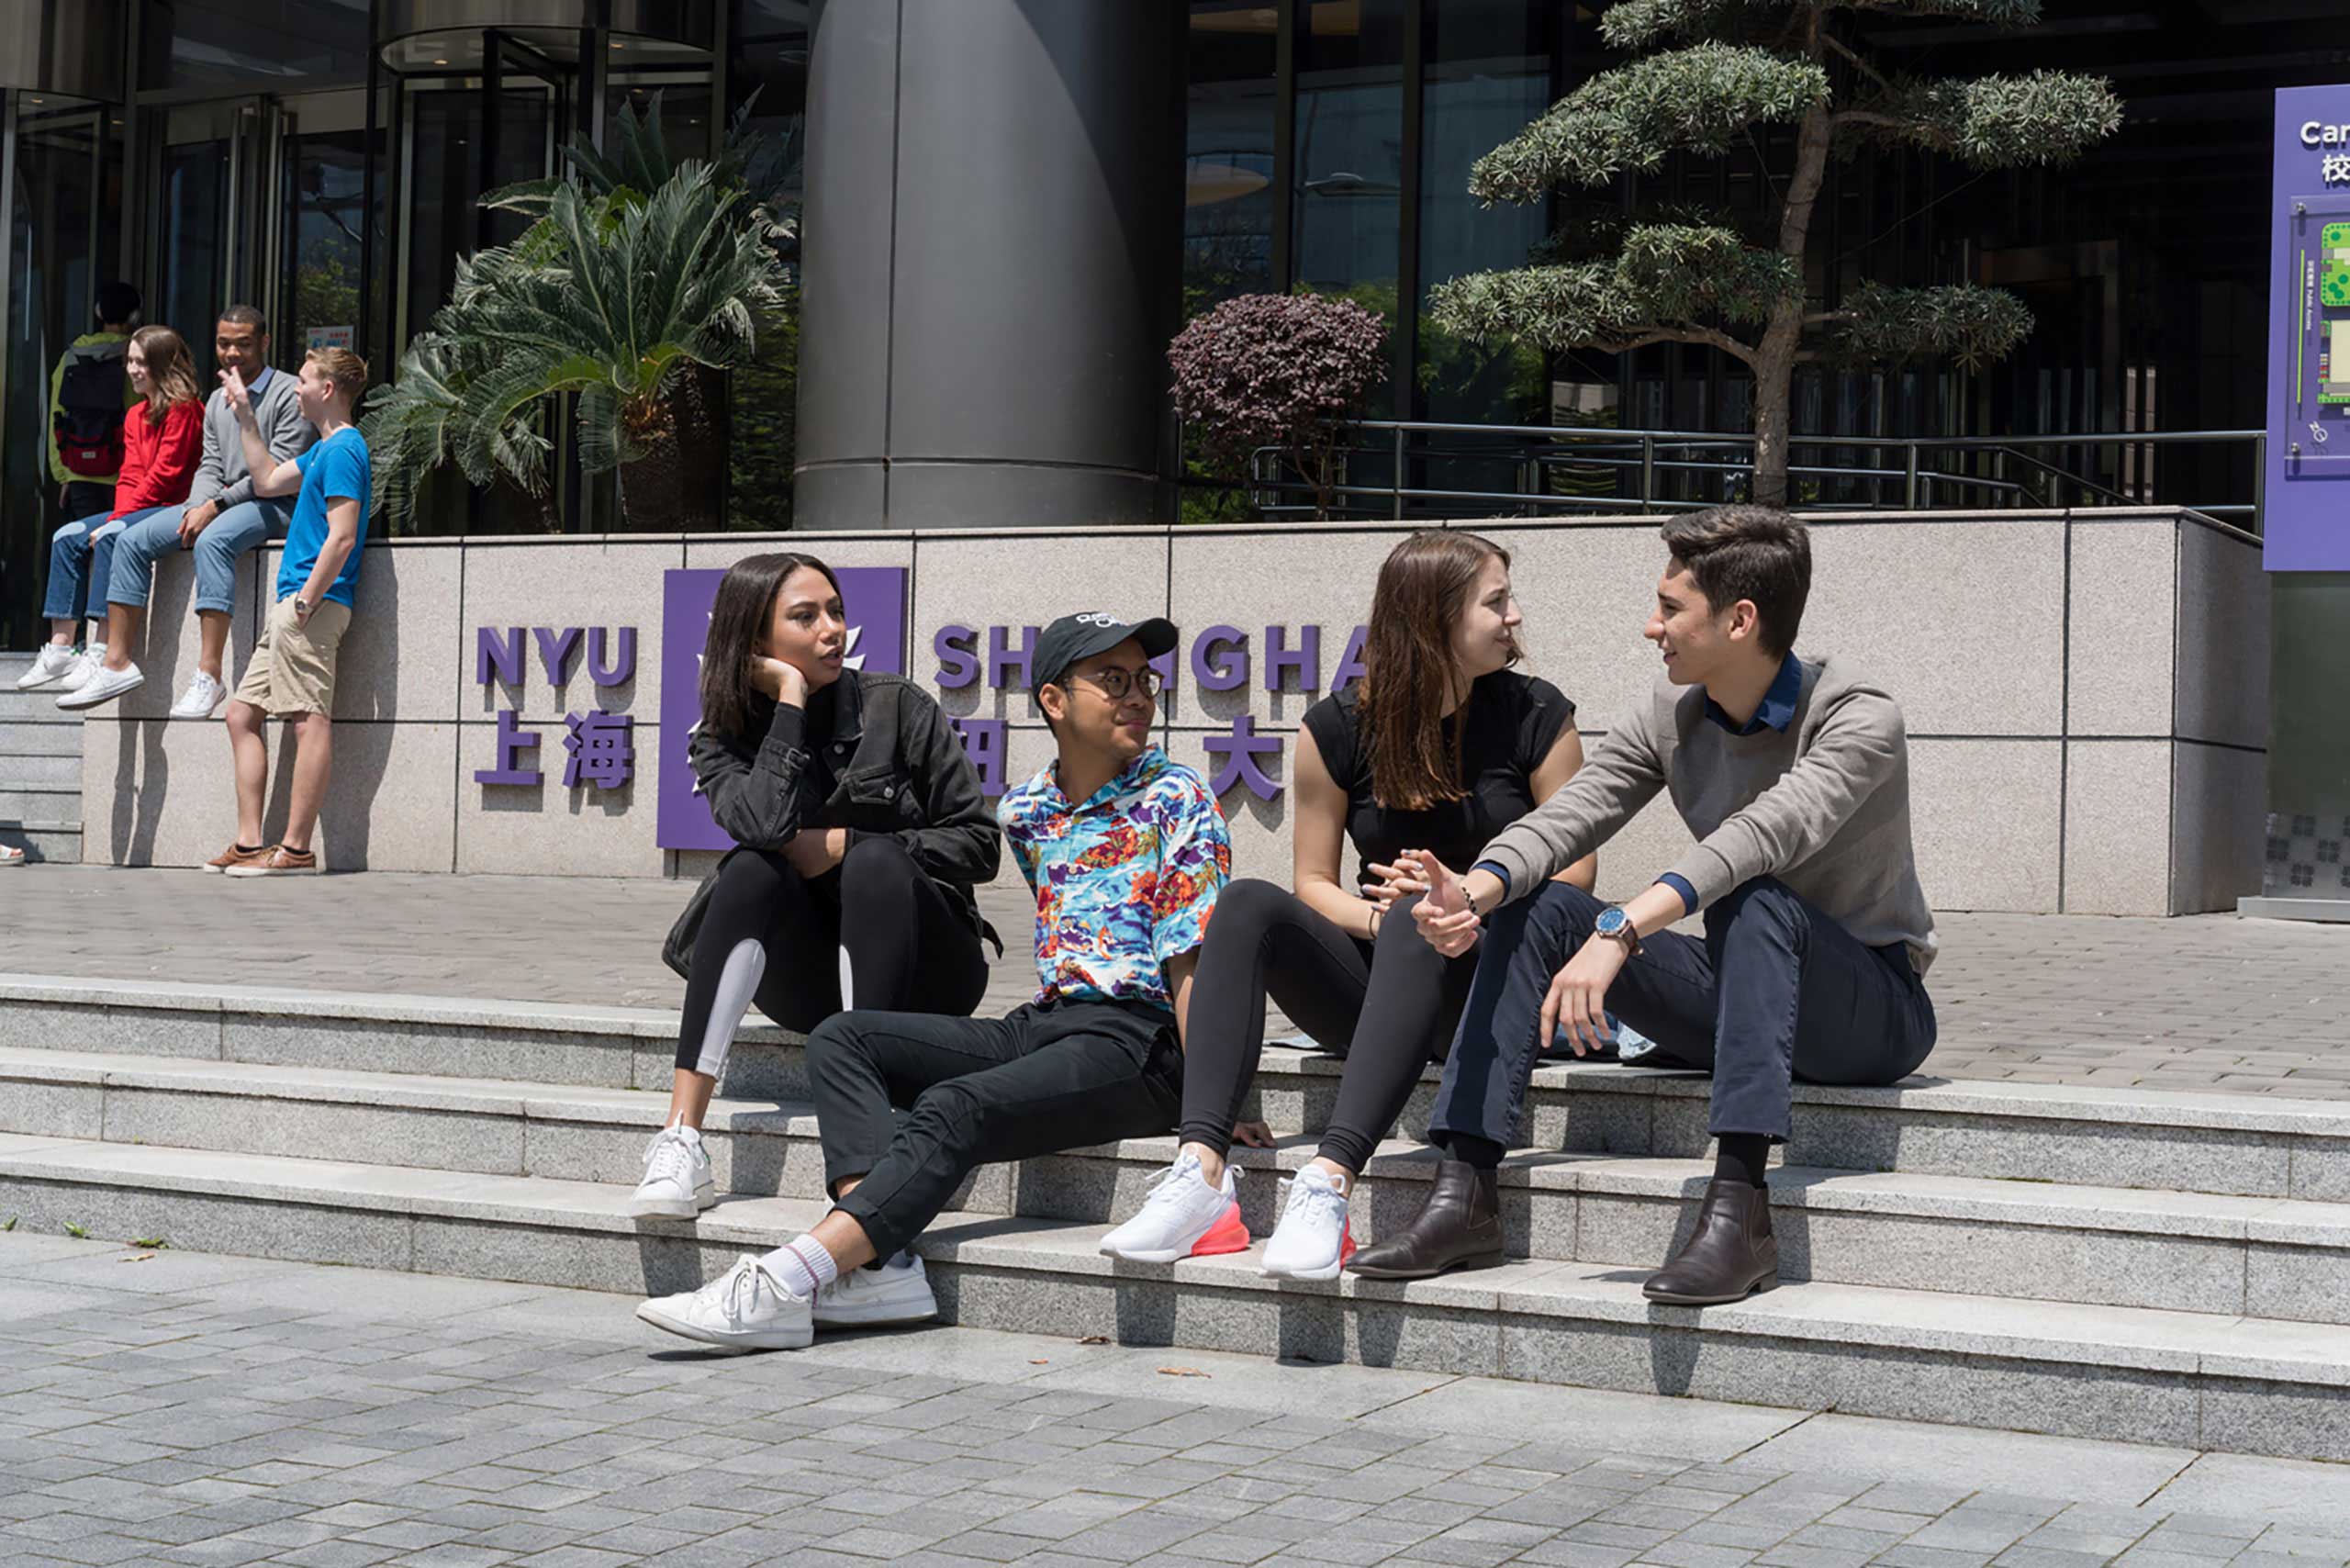 Students sitting on steps in front of NYU Shanghai's main entrance